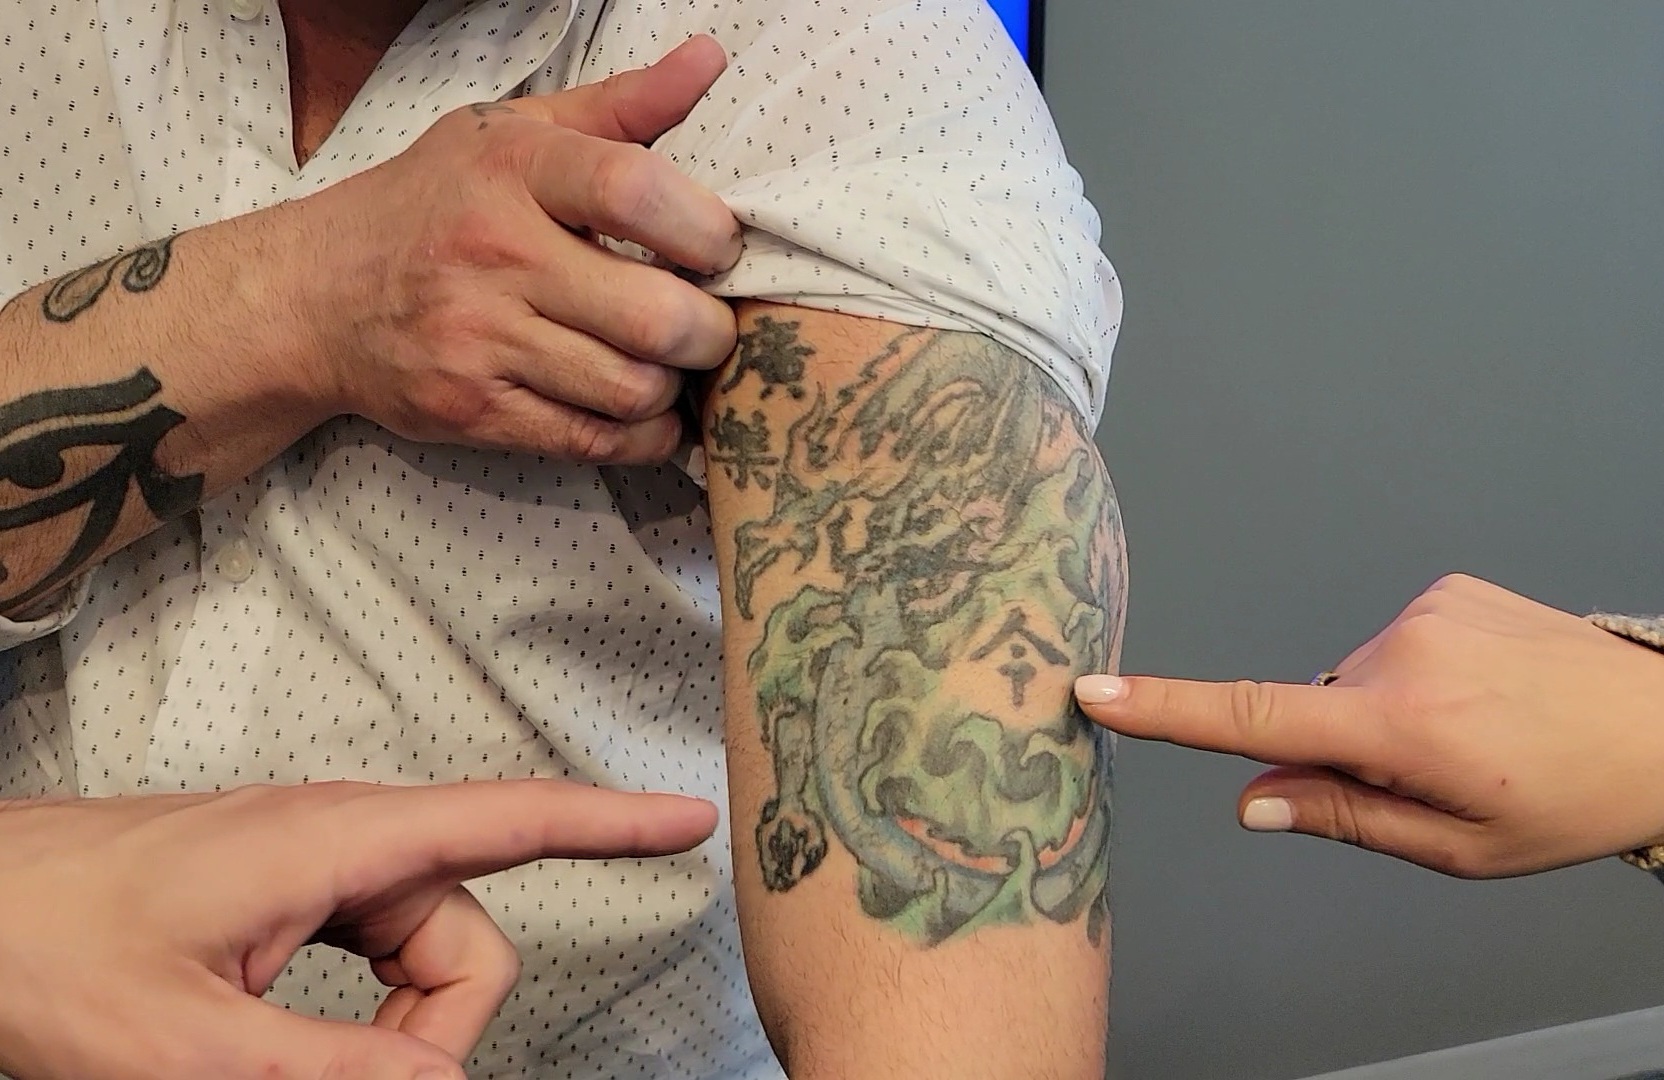 The Worst Tattoo On The Show